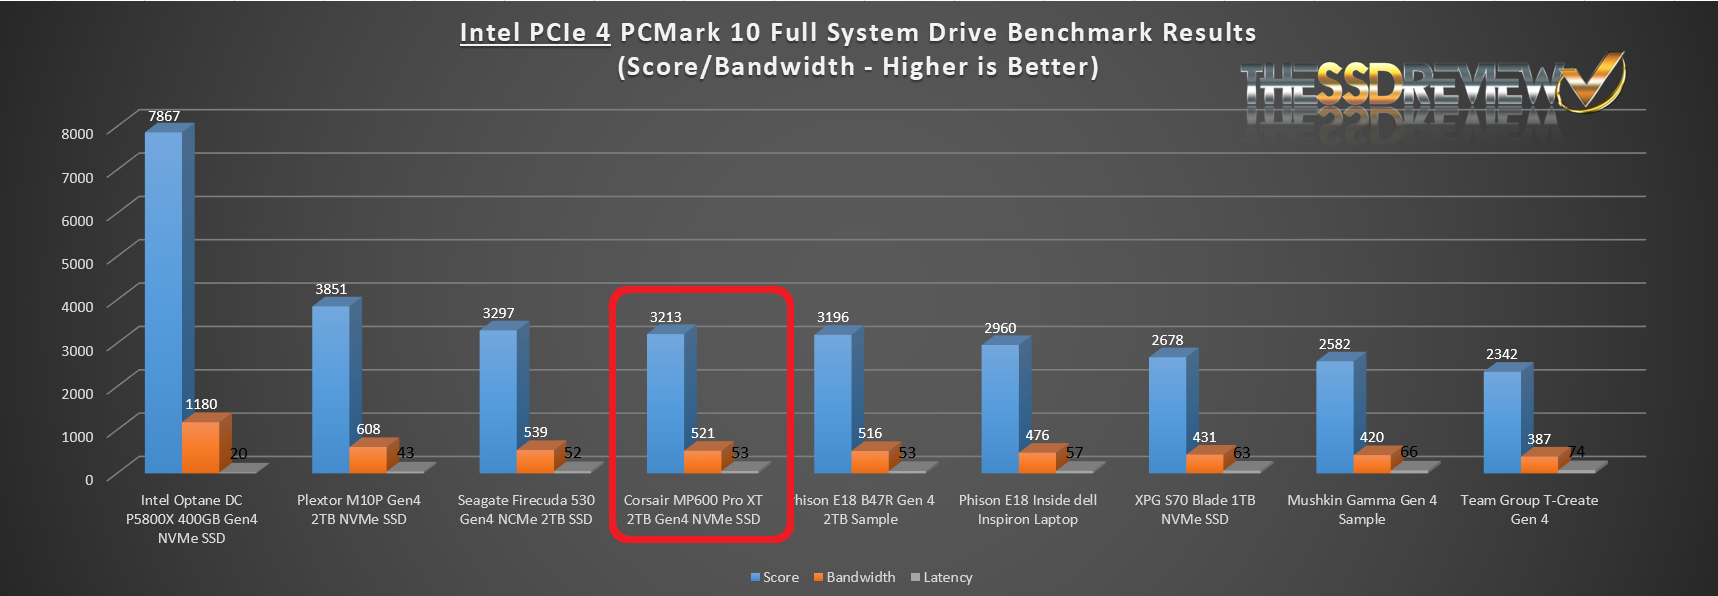 2TB Performance Results - Corsair MP600 Core XT SSD Review: Budget Capacity  - Page 2